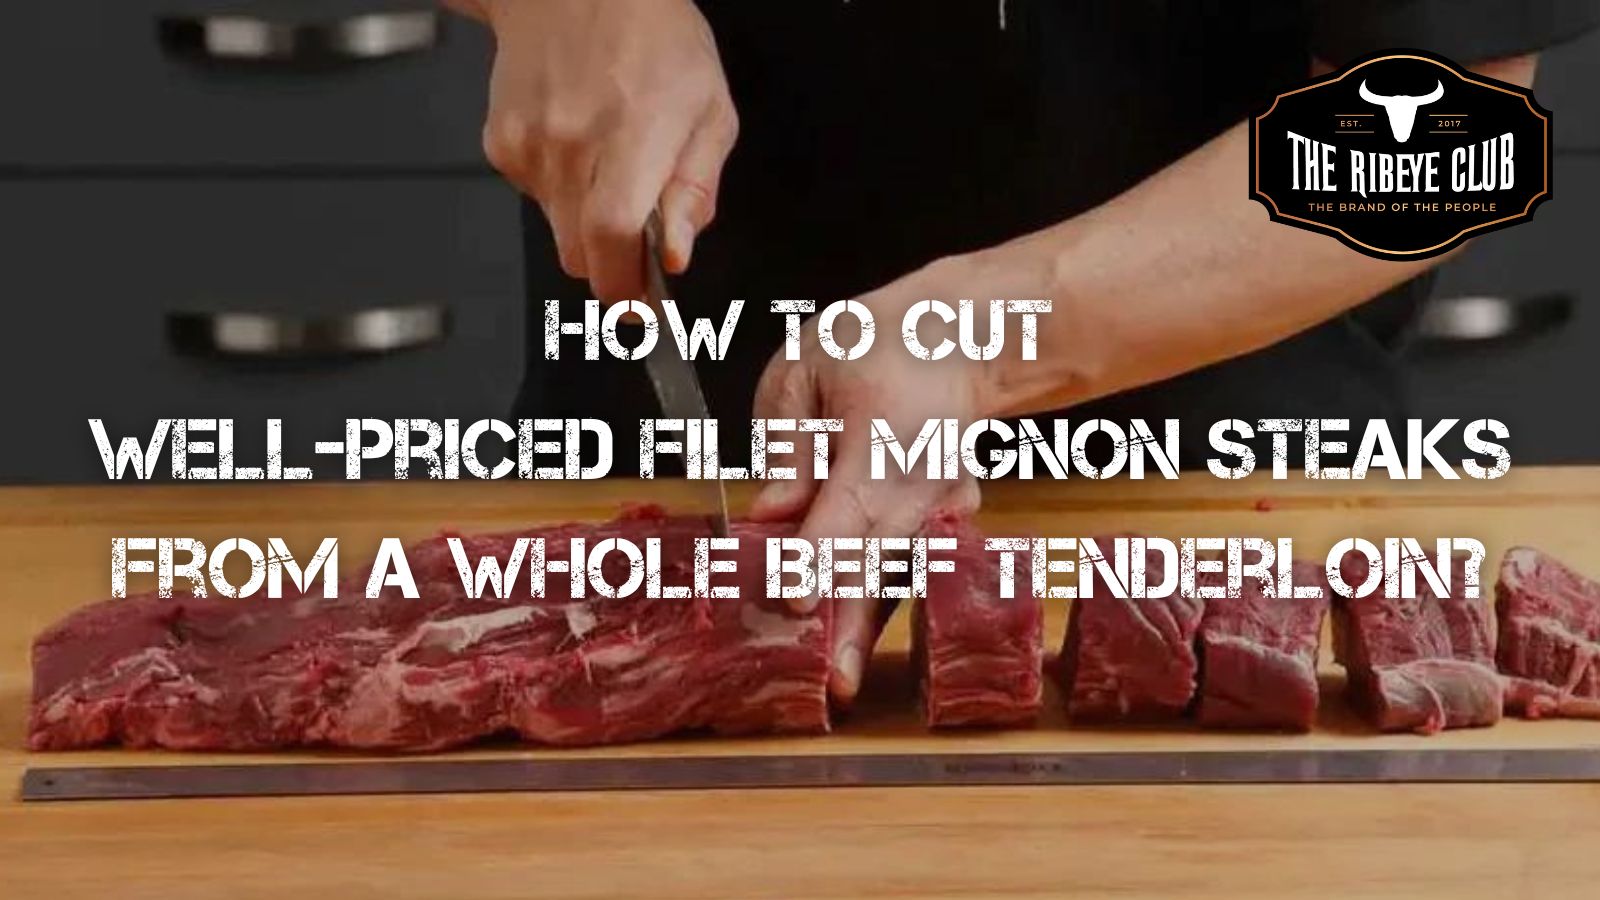 How To Cut Well-priced Filet Mignon Steaks From a Whole Beef Tenderloin?